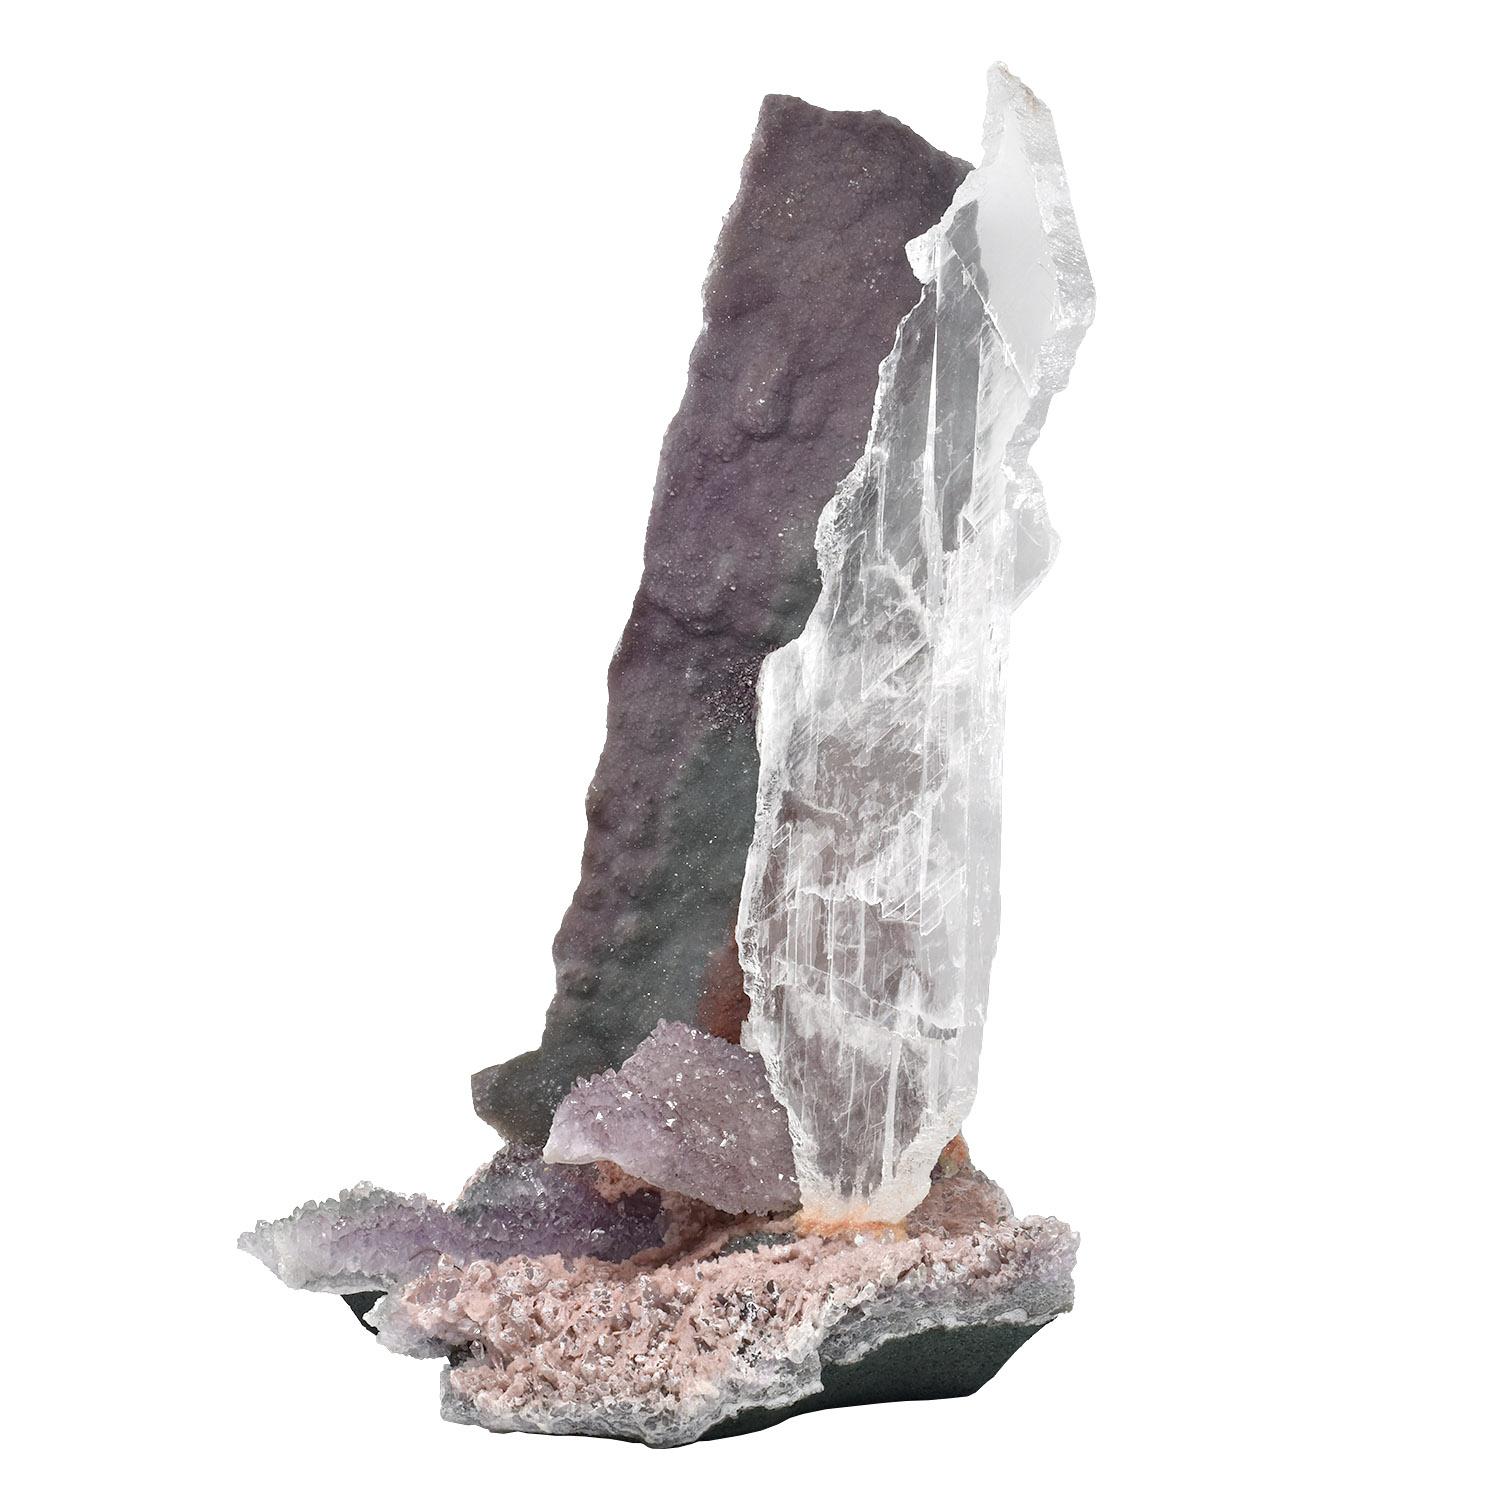 Large Amethyst and Gypsum Mineral Specimen sculpture

A transparent gypsum crystal mounted on a portion of natural matrix encrusted with small, pale, multicolored amethyst crystals. The upright panel’s crystals range from pale amethyst to green to